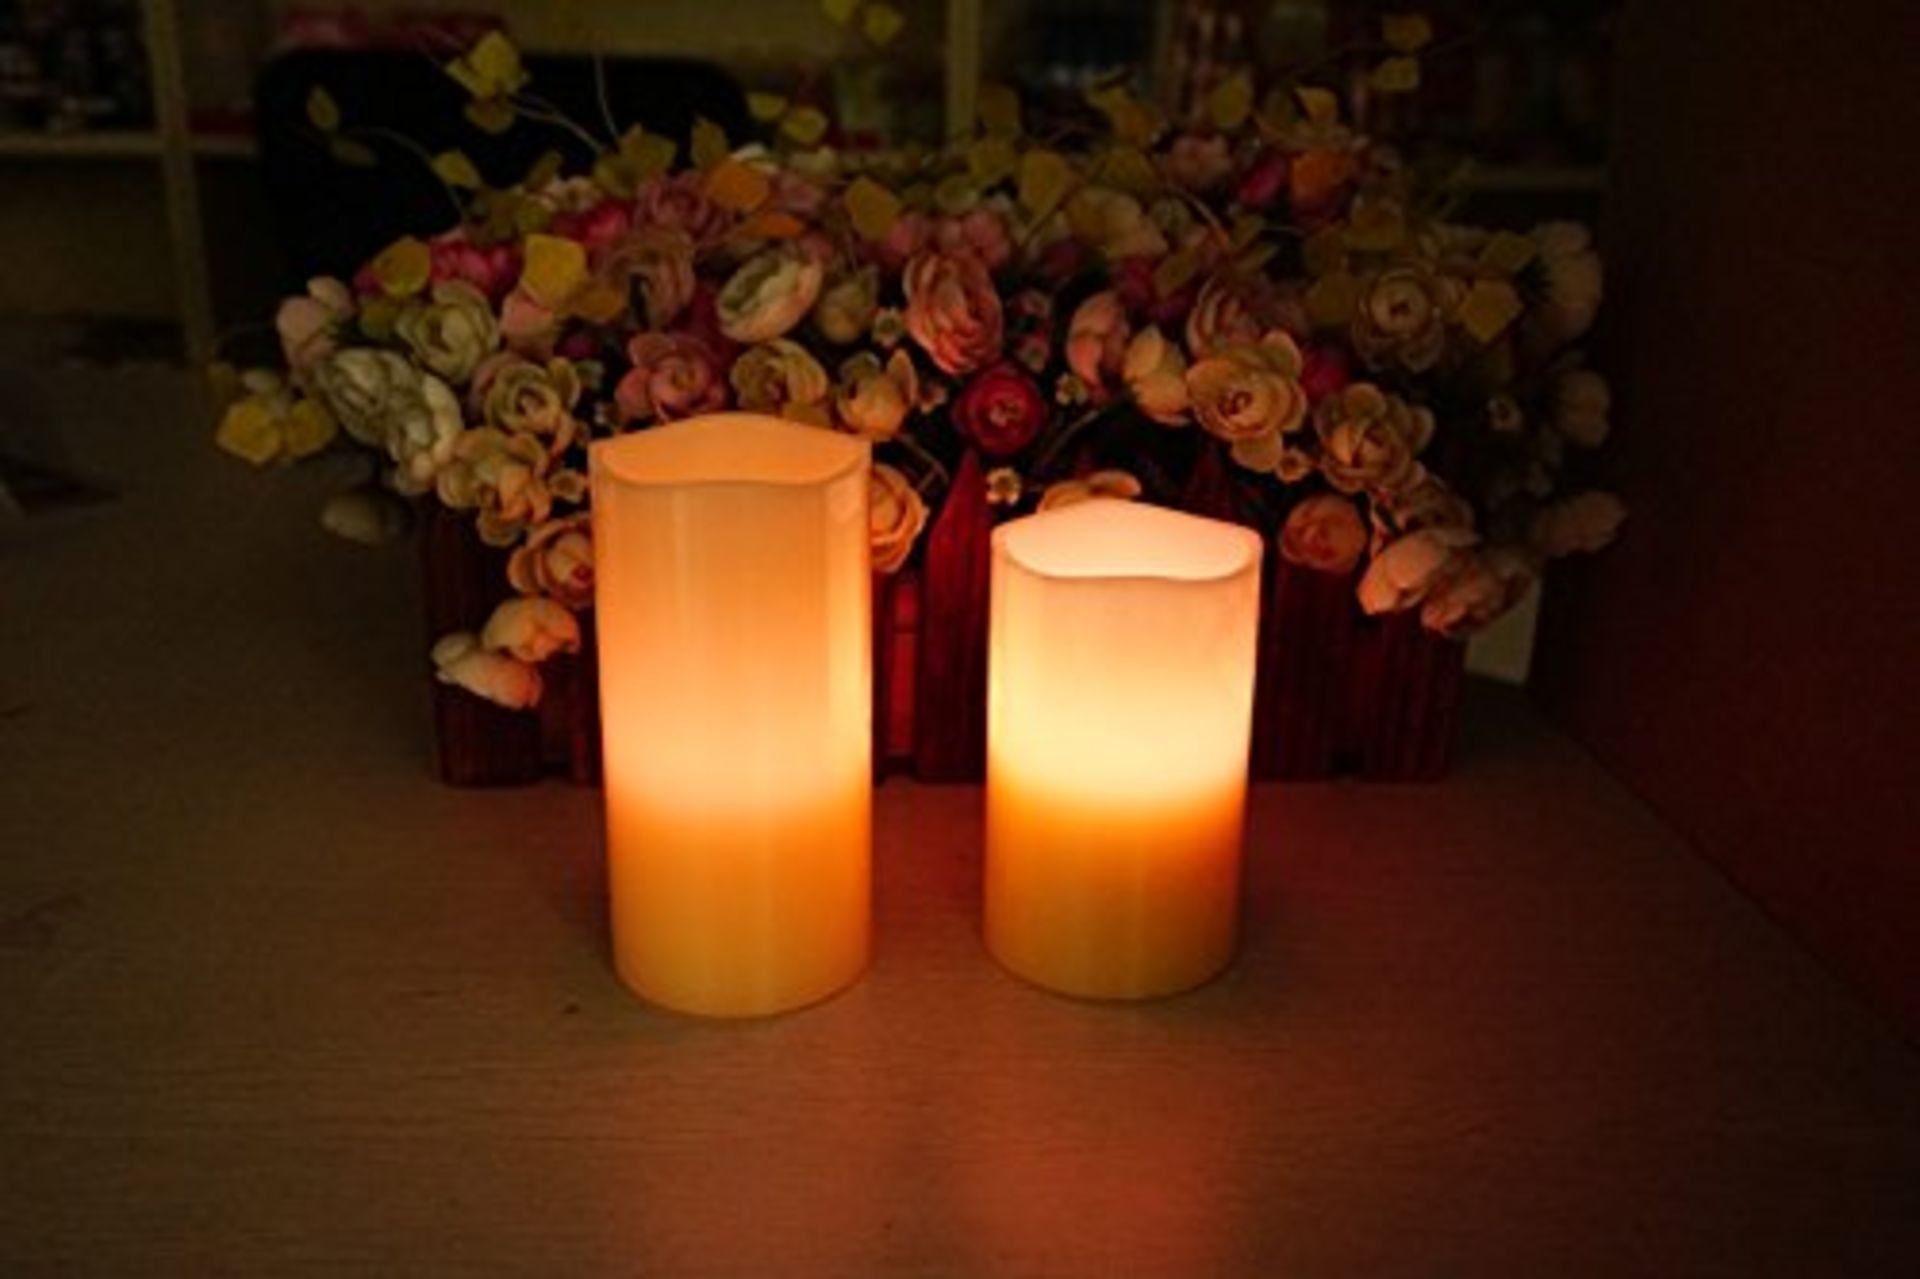 V Brand New 2 Pack of LED Rechargeable Jasmine Scented Candles with Colour changing Remote Control